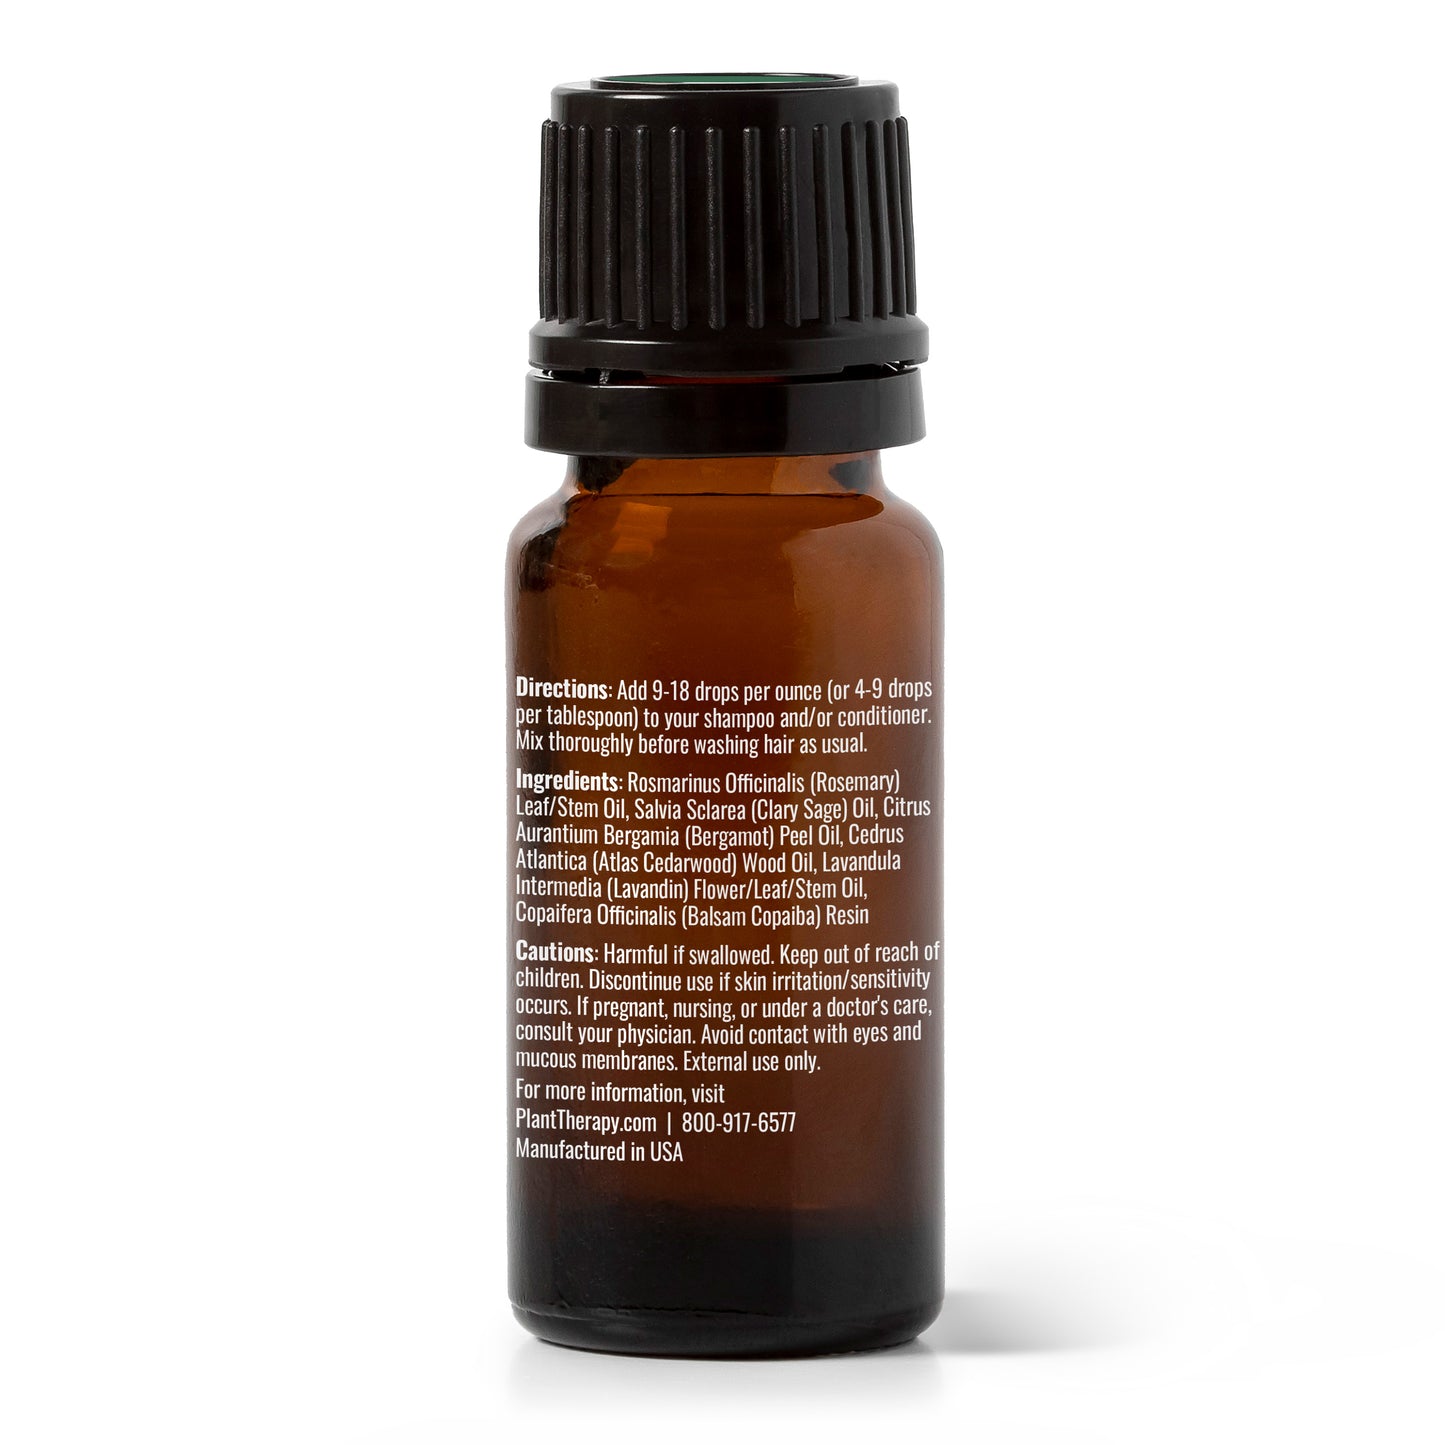 Hair Therapy Essential Oil Blend back label